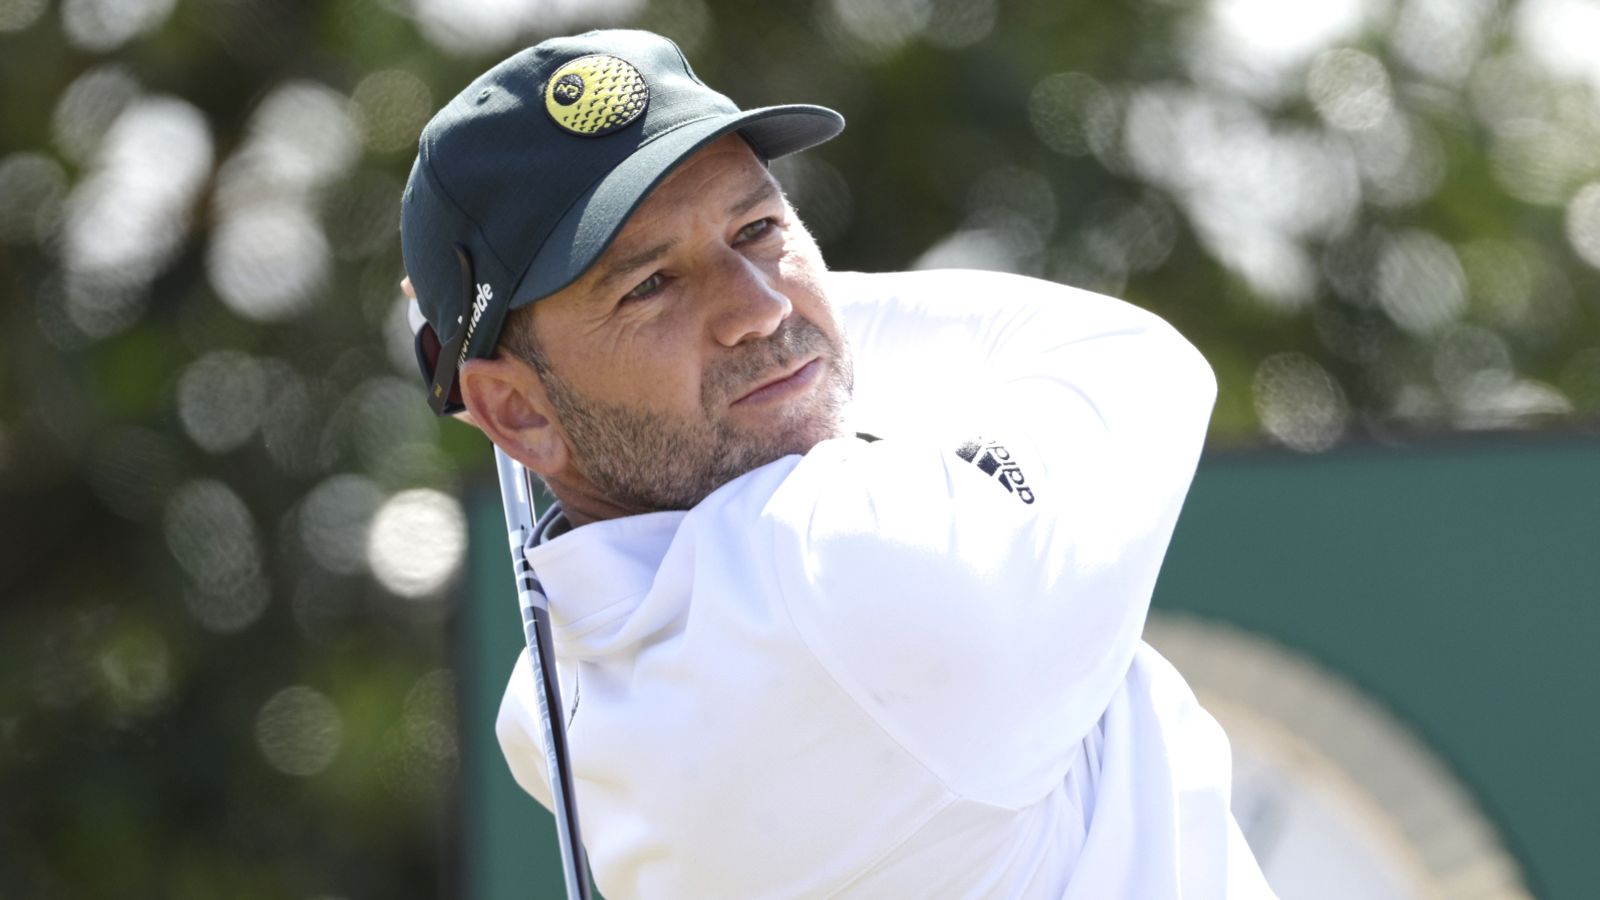 Sergio Garcia set to quit DP World Tour as he doesn’t ‘feel loved’, while Bryson DeChambeau gears up for next LIV events | Golf News